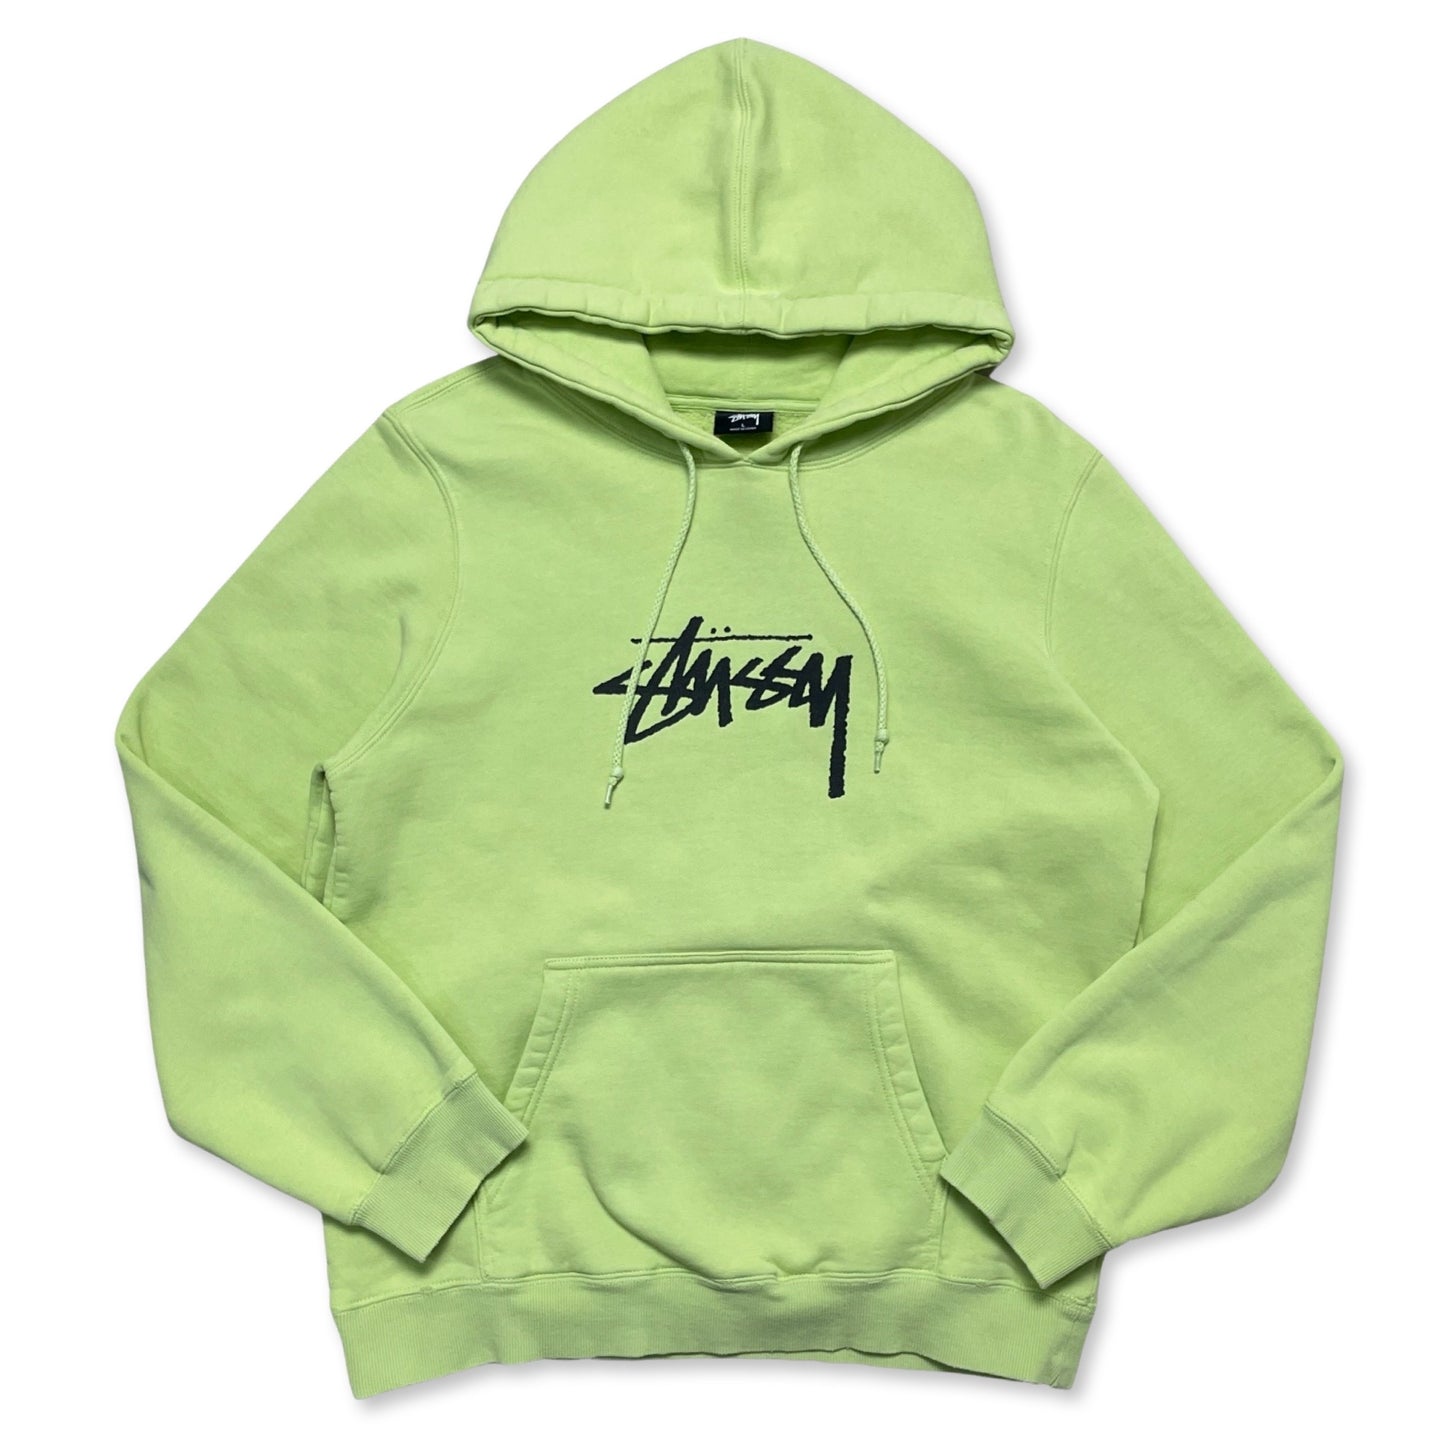 Stussy Spellout Hoodie (Fits Small Men's or Wmn's Large)